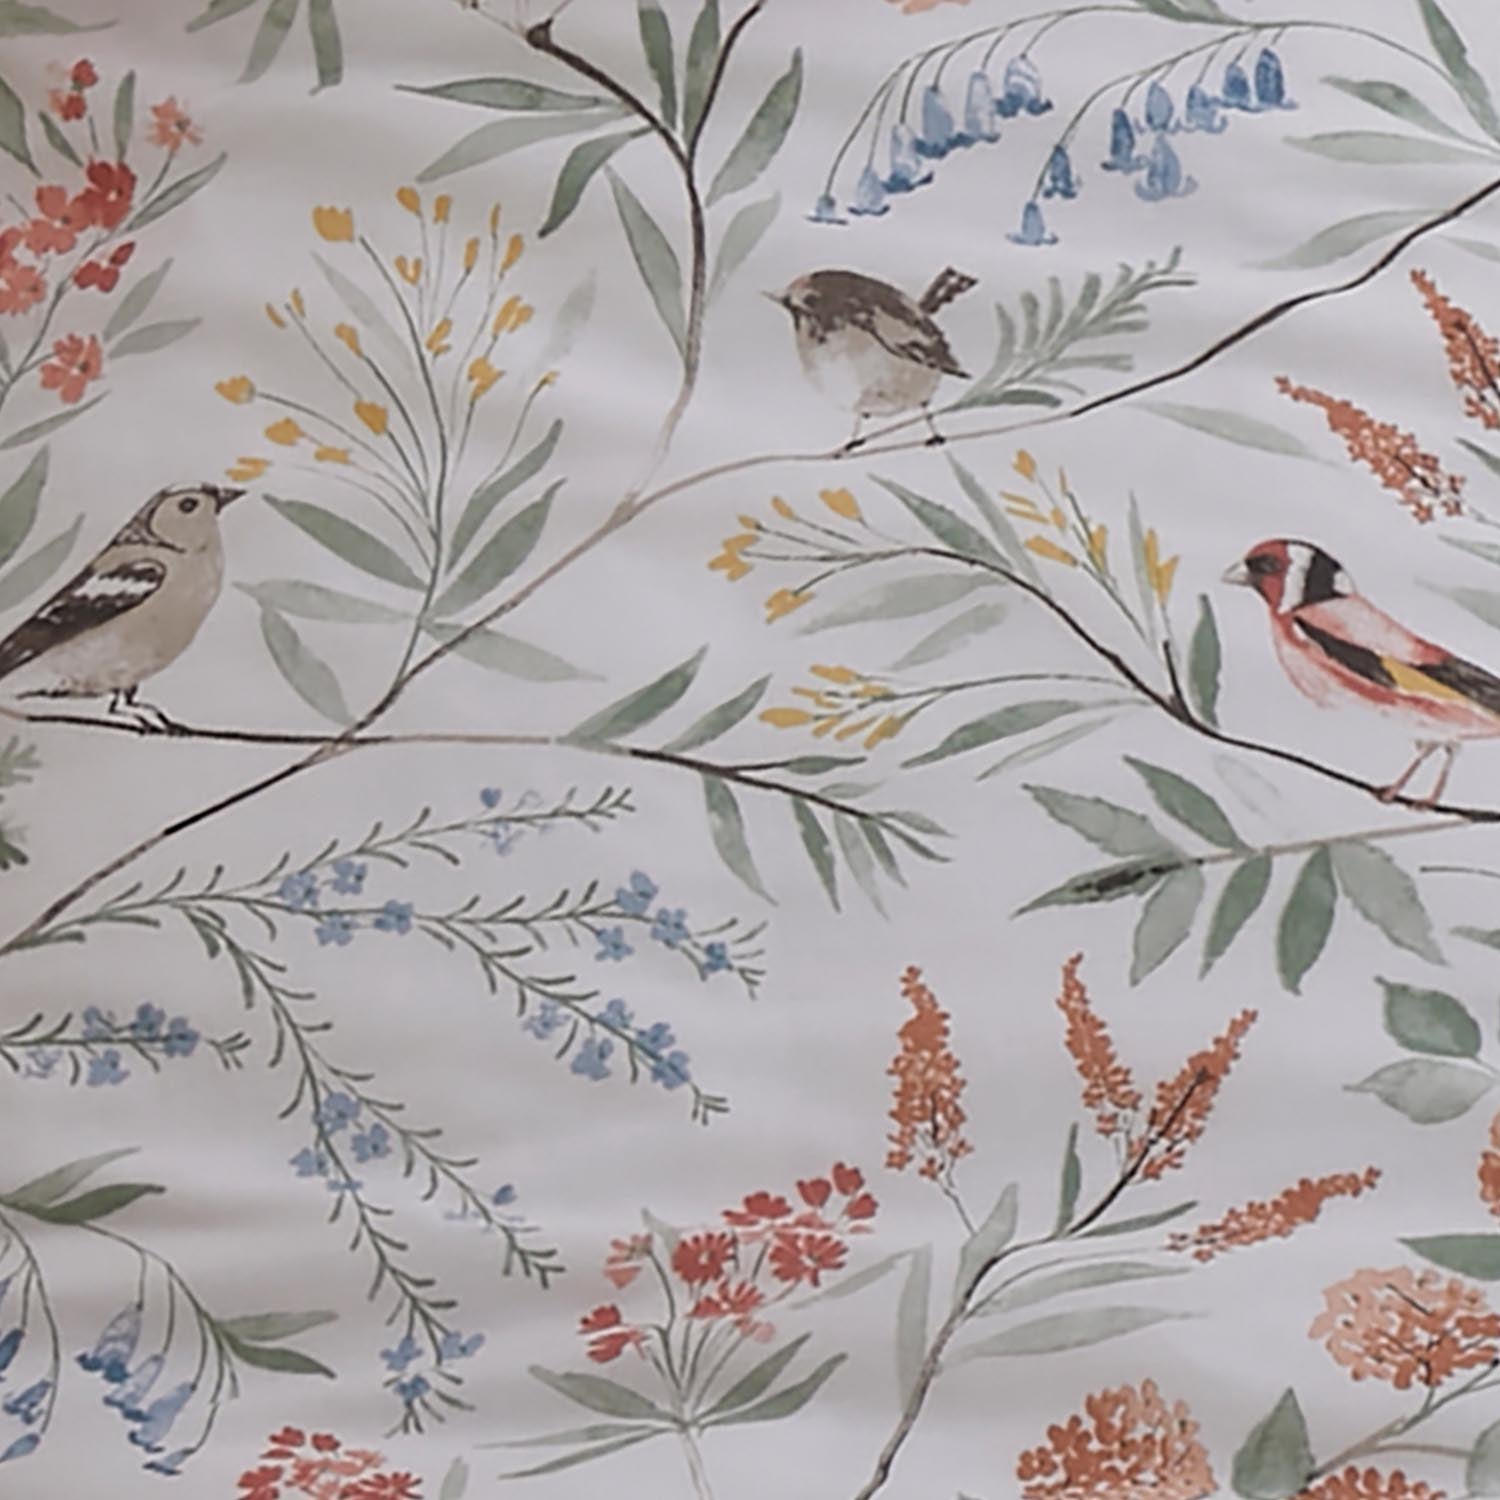  The Home Collection Bird Floral Terracotta Duvet Cover Set 4 Shaws Department Stores